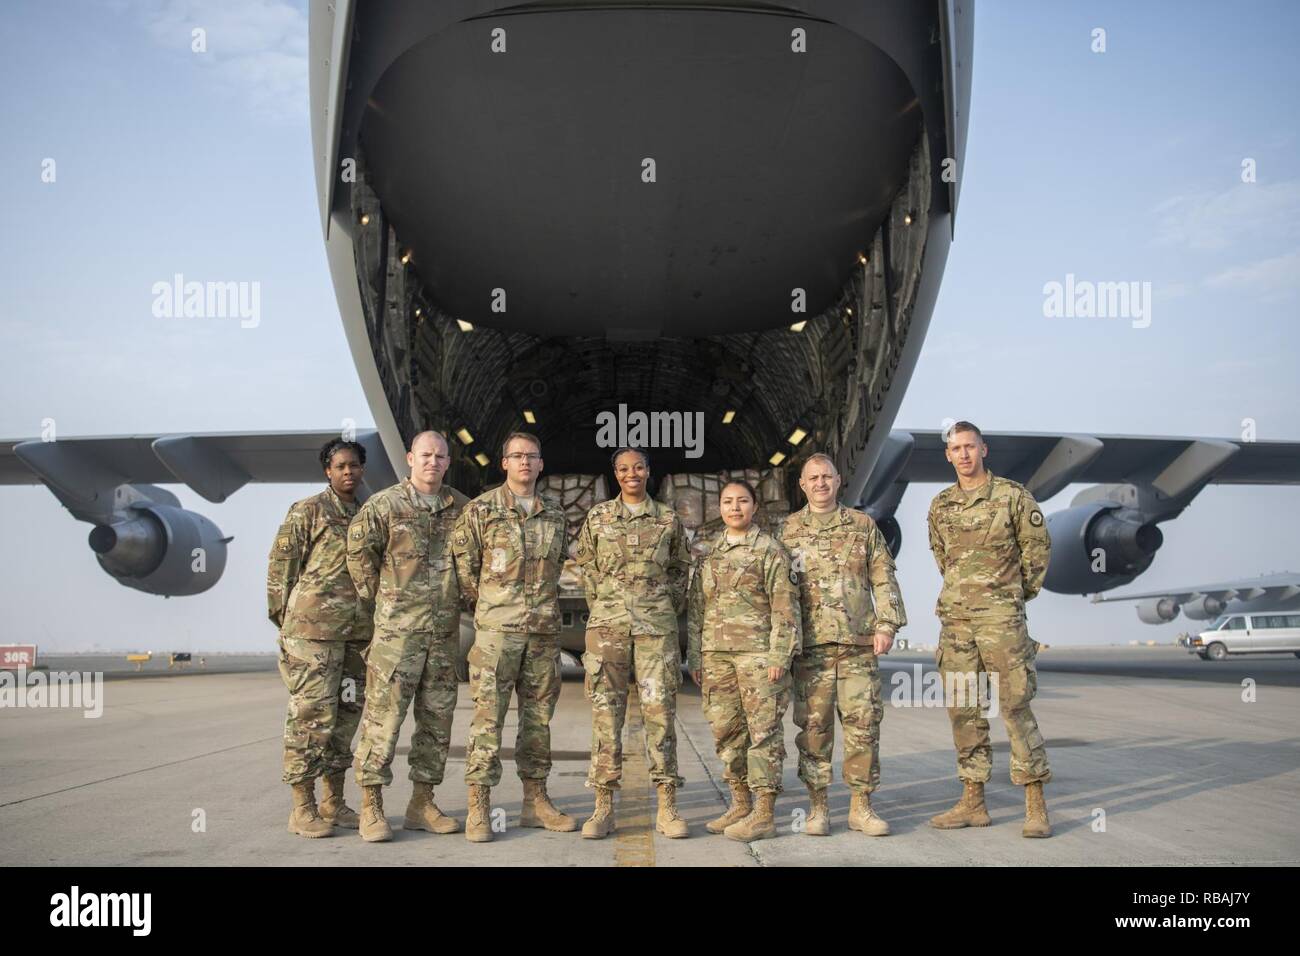 Members of the 386th Expeditionary Force Support Squadron Sustainment Services Flight, pose for a group photo in front of A C-17 Globemaster III loaded 14 aircraft pallets containing war reserve material at an undisclosed location in Southwest Asia, Dec. 20, 2018. The cargo, procured and coordinated by the flight, will support a mandated coalition exercise for the sustainment, morale, and training of 300 personnel. Stock Photo